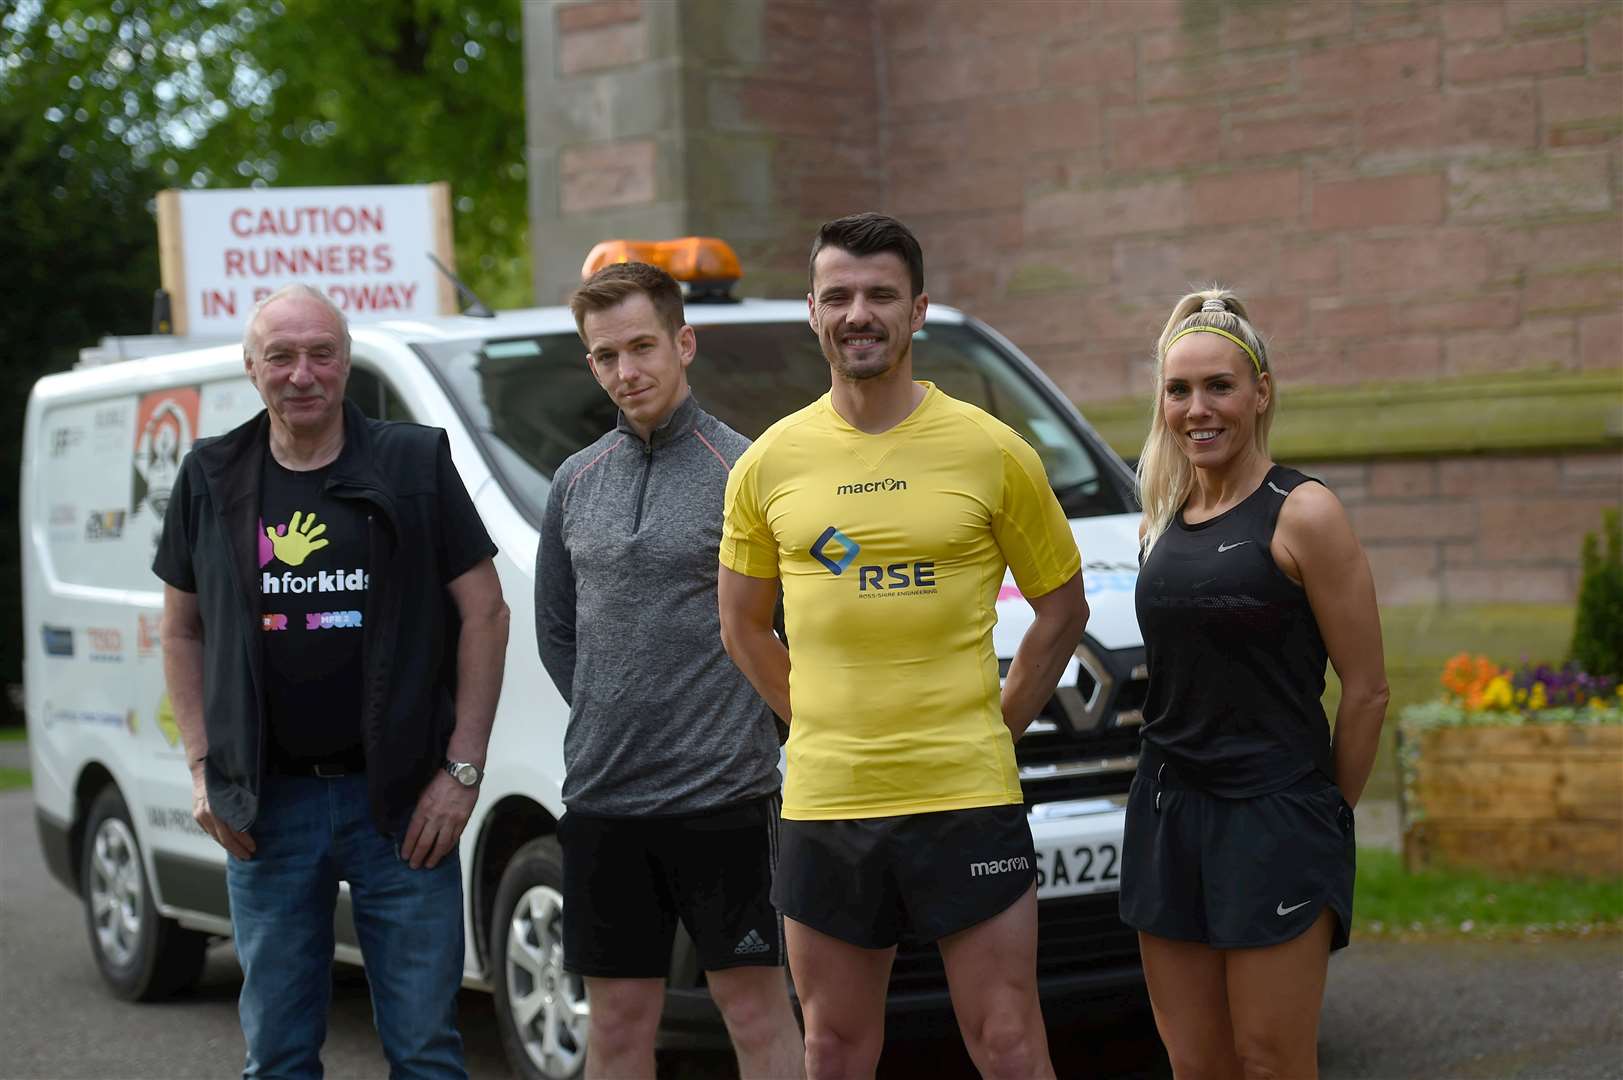 Steven Mackay is running all 516 miles of the NC500 in just 10 days. From left, Donald Grant (driver) Andrew Macleod, Steven Mackay and Kellie Calder. Picture: Callum Mackay